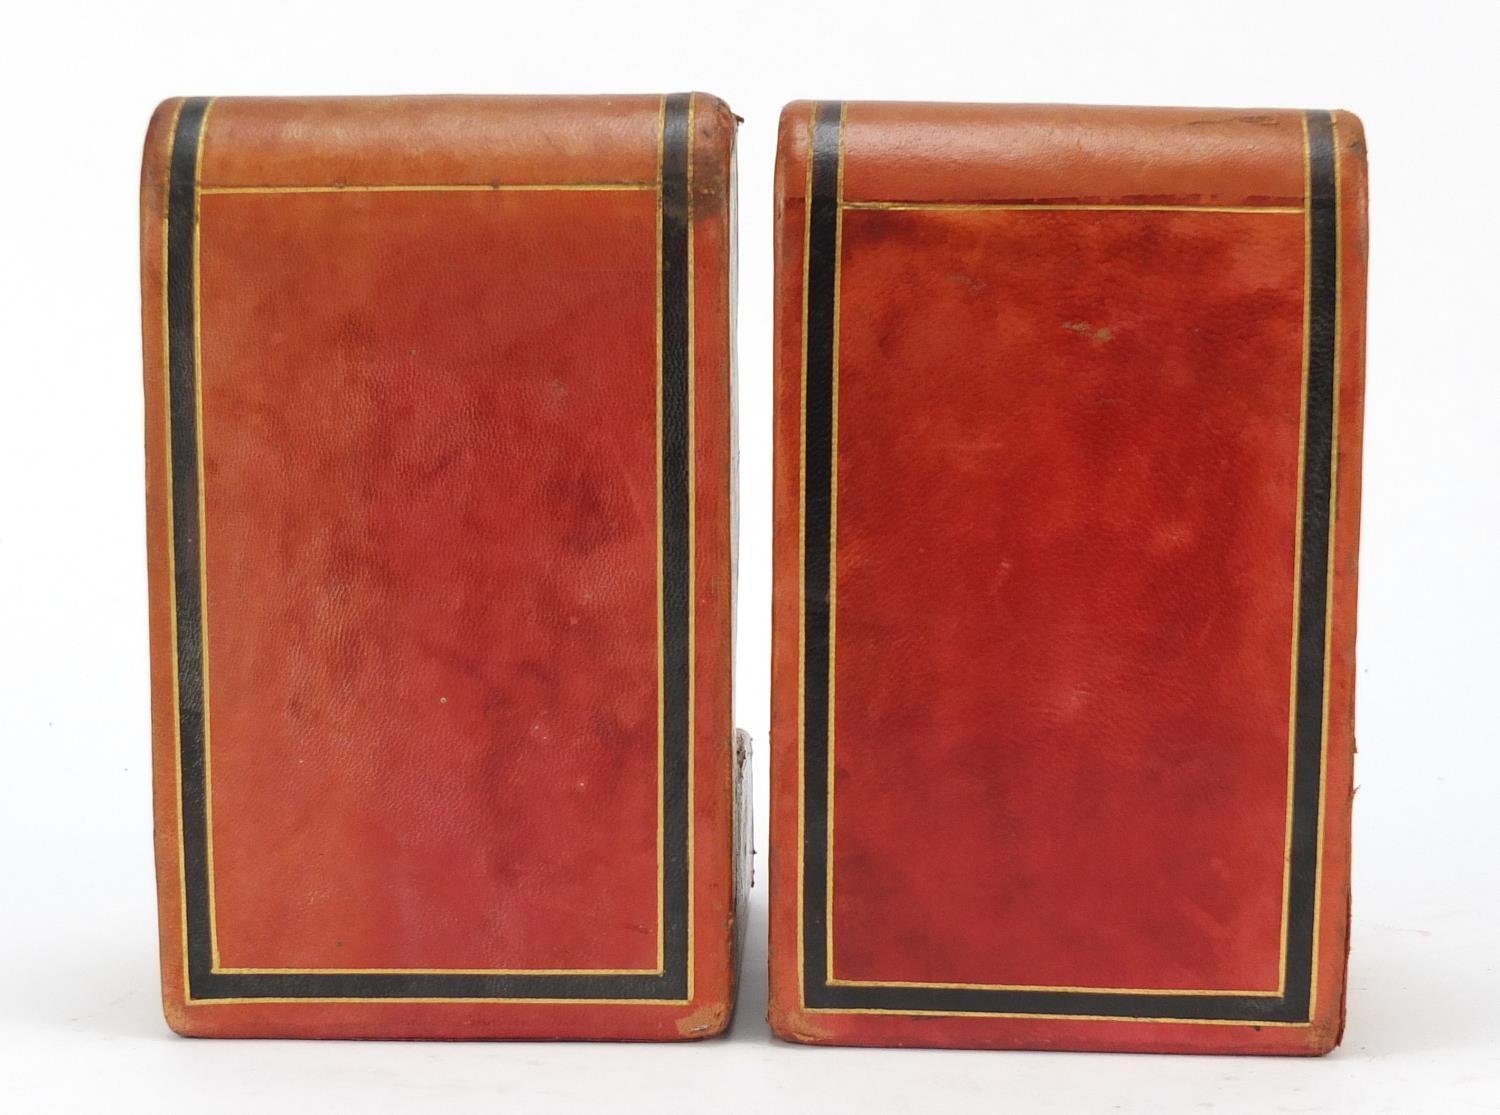 Pair of Italian tooled leather book ends with embossed crests, retailed by Harrods, each 17cm high : - Image 6 of 9